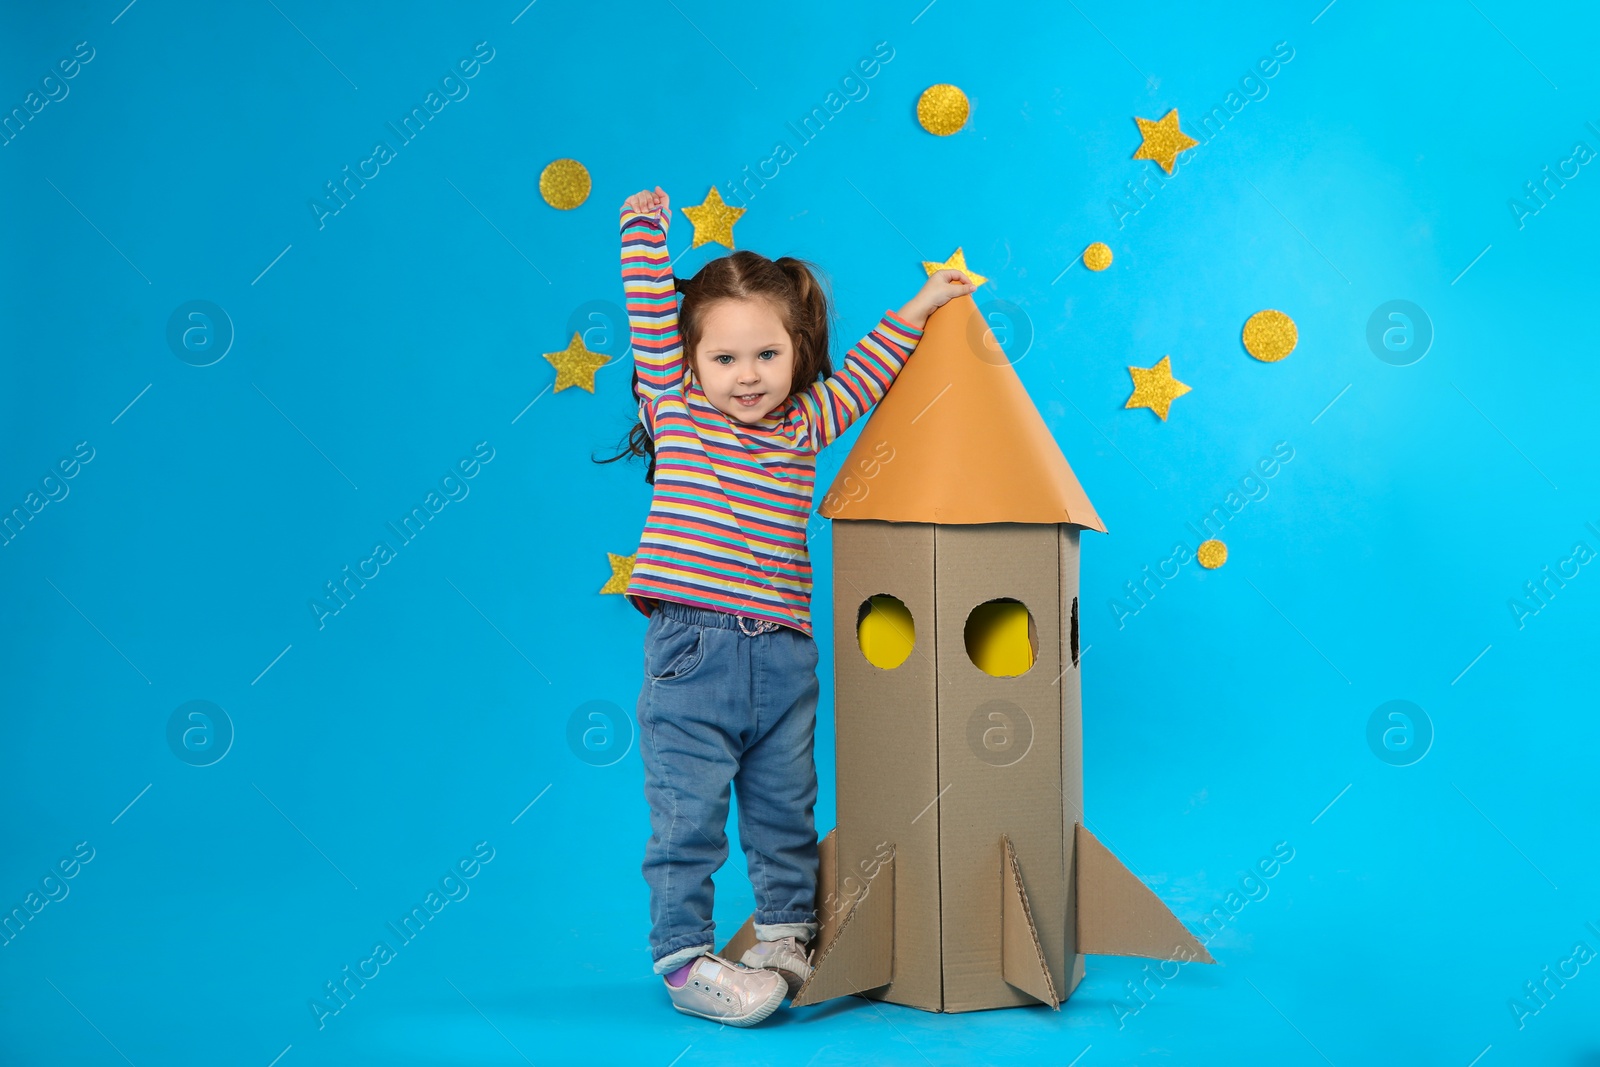 Photo of Little child playing with rocket made of cardboard box near stars on blue background